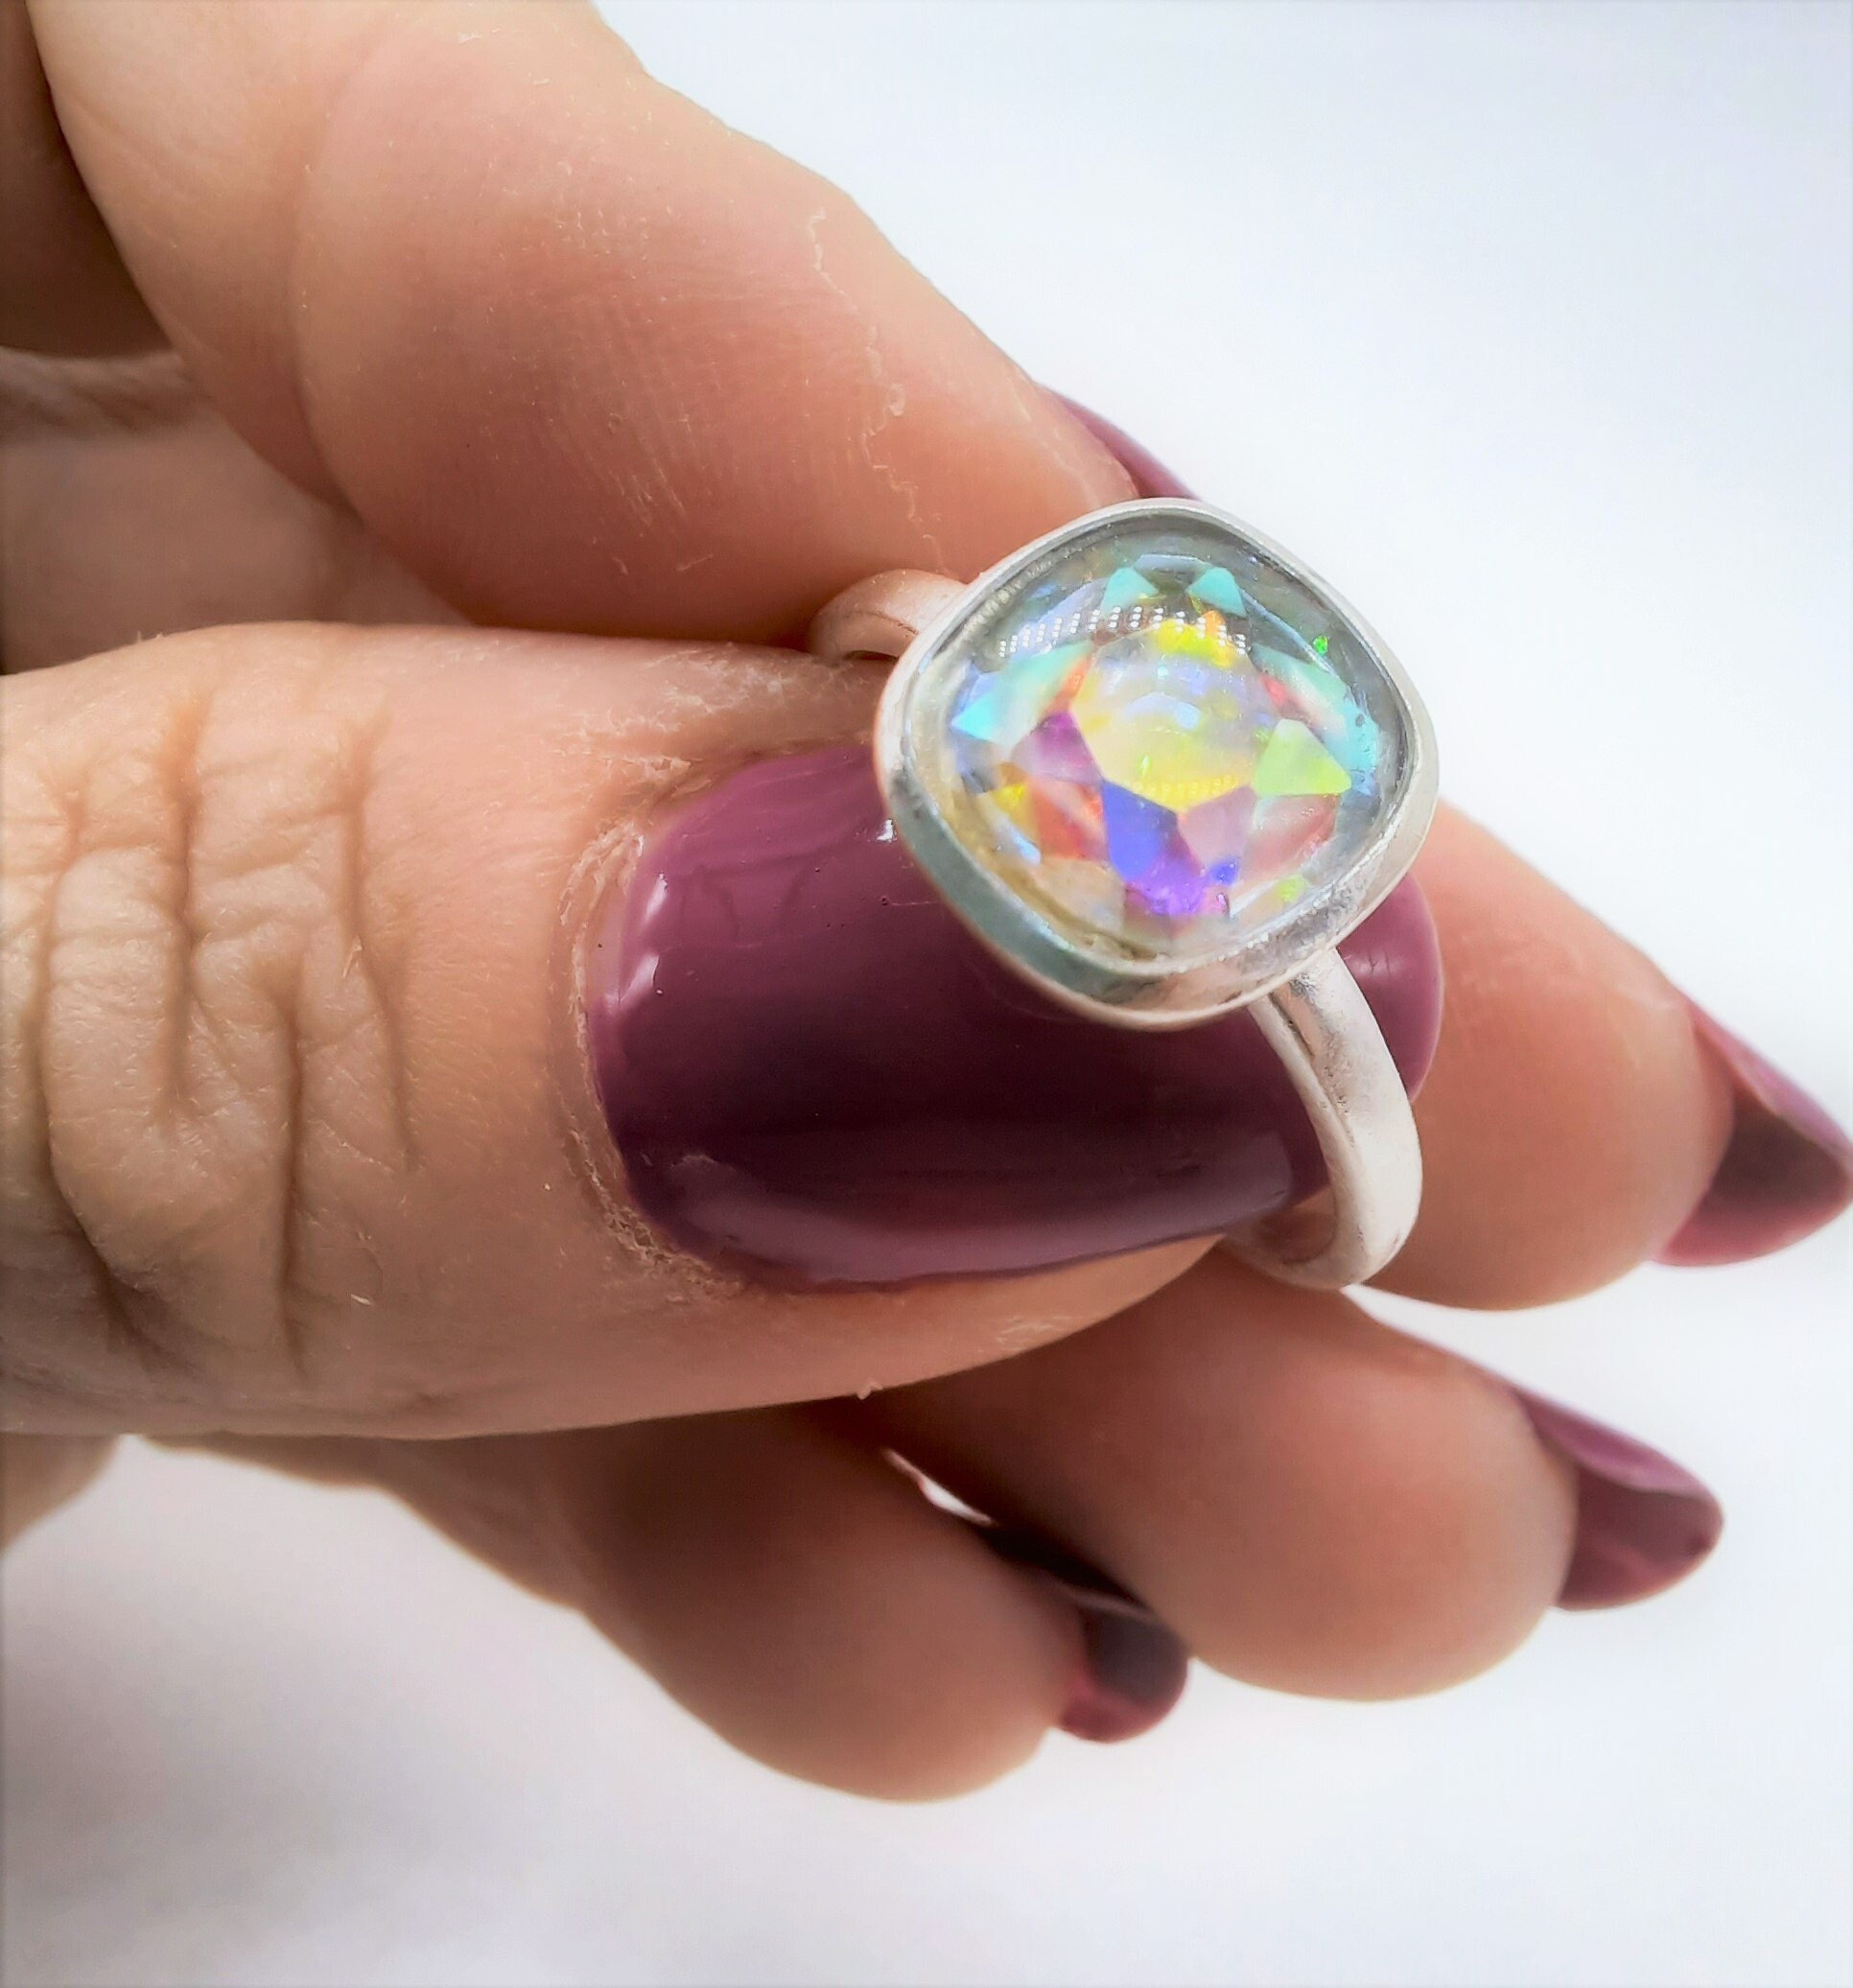 Amazon.com: Handcrafted Square Design 925 Sterling Silver Iridescent  Multifaceted Ruby Red Aurora Borealis Ring, Domed with Mica Infused Resin :  Handmade Products